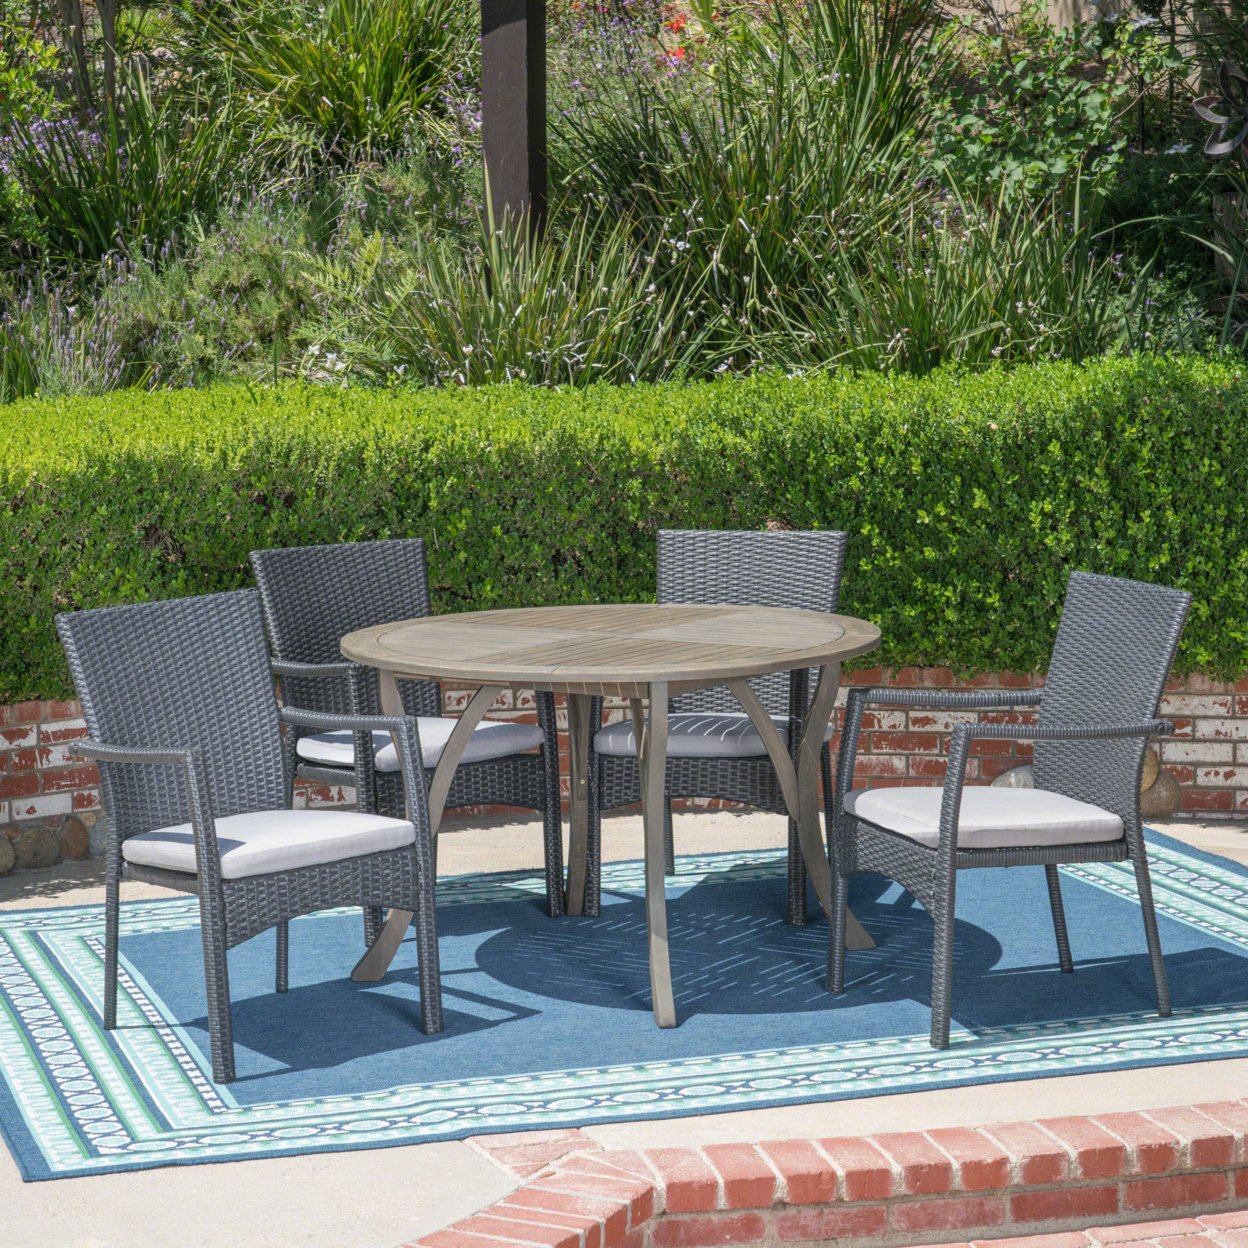 Baldry Outdoor 5 Piece Acacia Wood And Wicker Dining Set - Gray